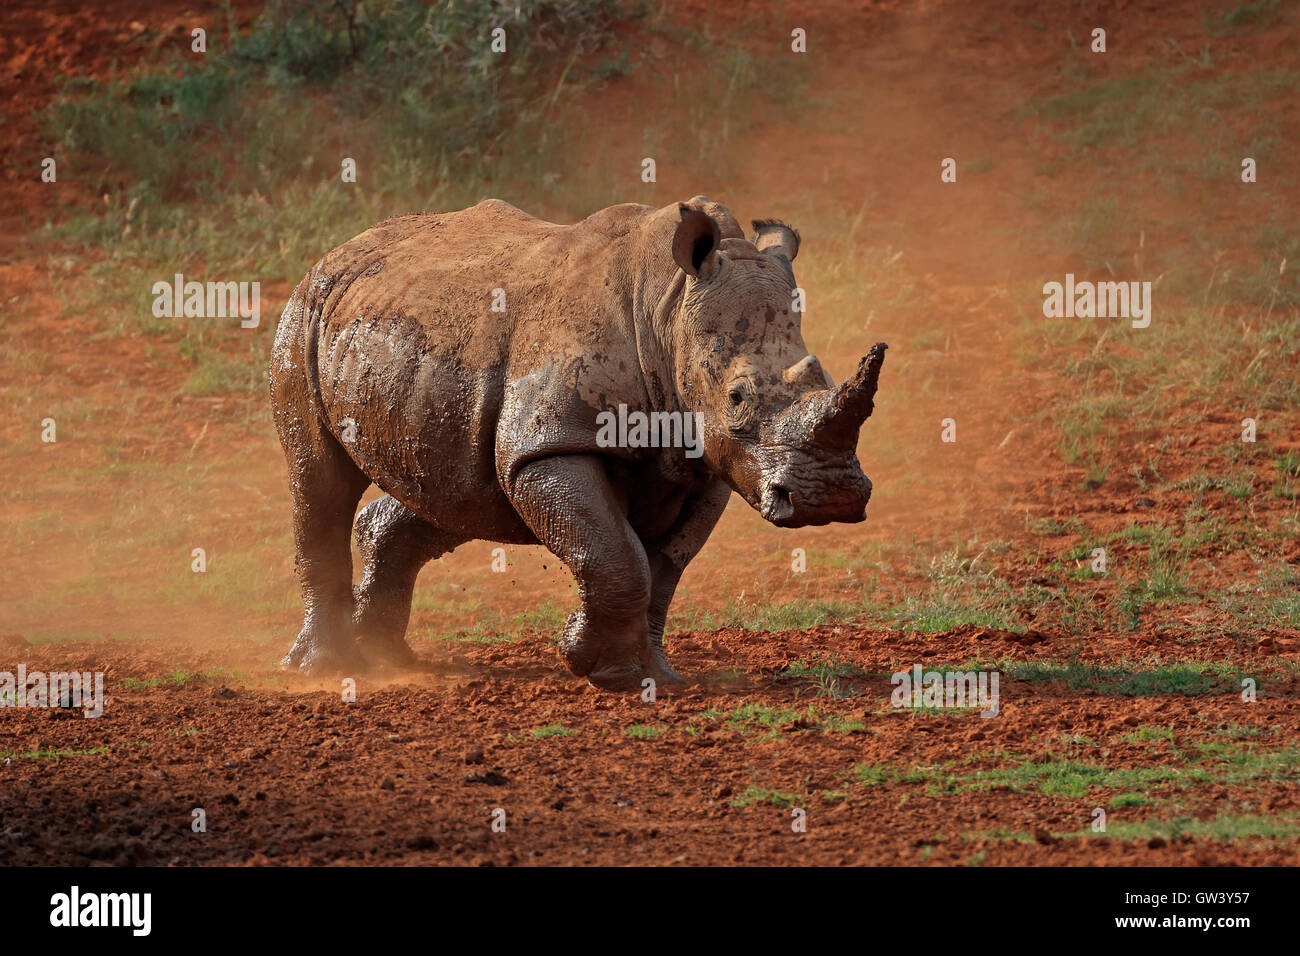 A white rhinoceros (Ceratotherium simum) walking in dust, South Africa Stock Photo